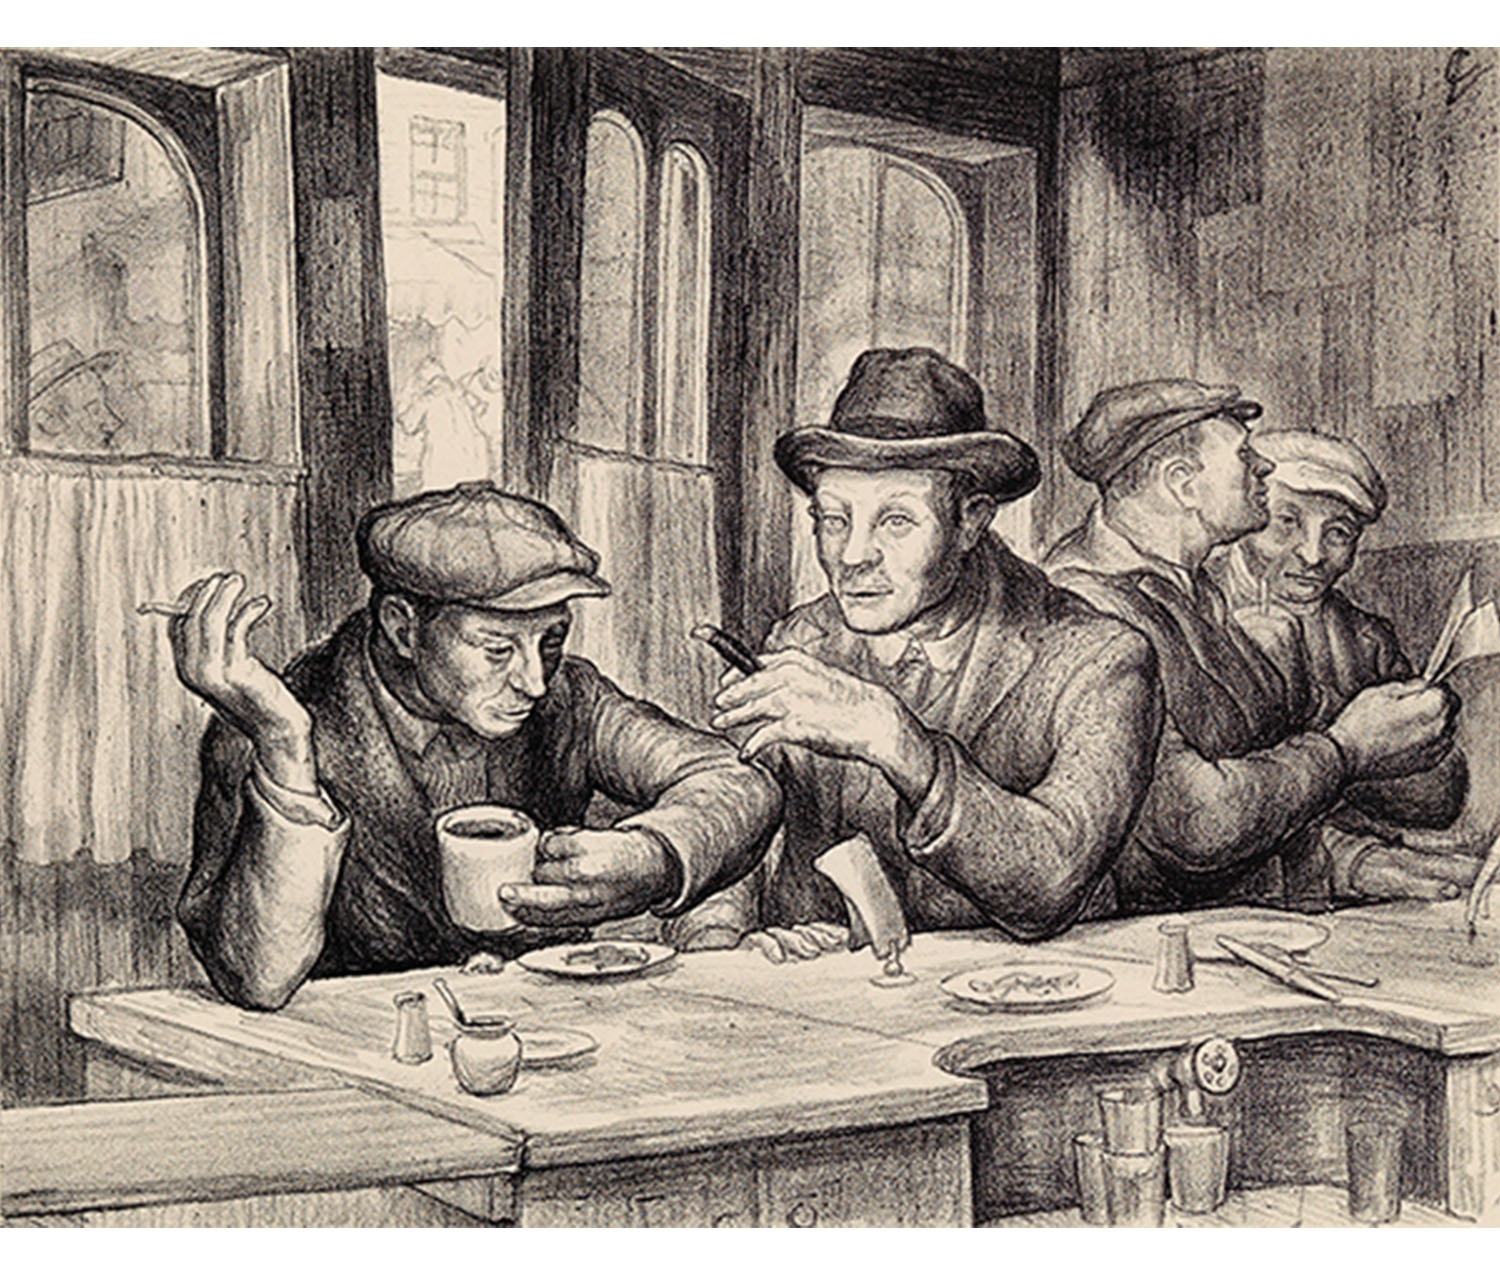 An indoor scene of four men sitting at the counter of a greasy-spoon diner, drinking coffee and smoking. The two men in the foreground are deep in conversation, while the other pair is looking over their food bill. Behind the men the restaurant door is slightly open, revealing people on the street outside.